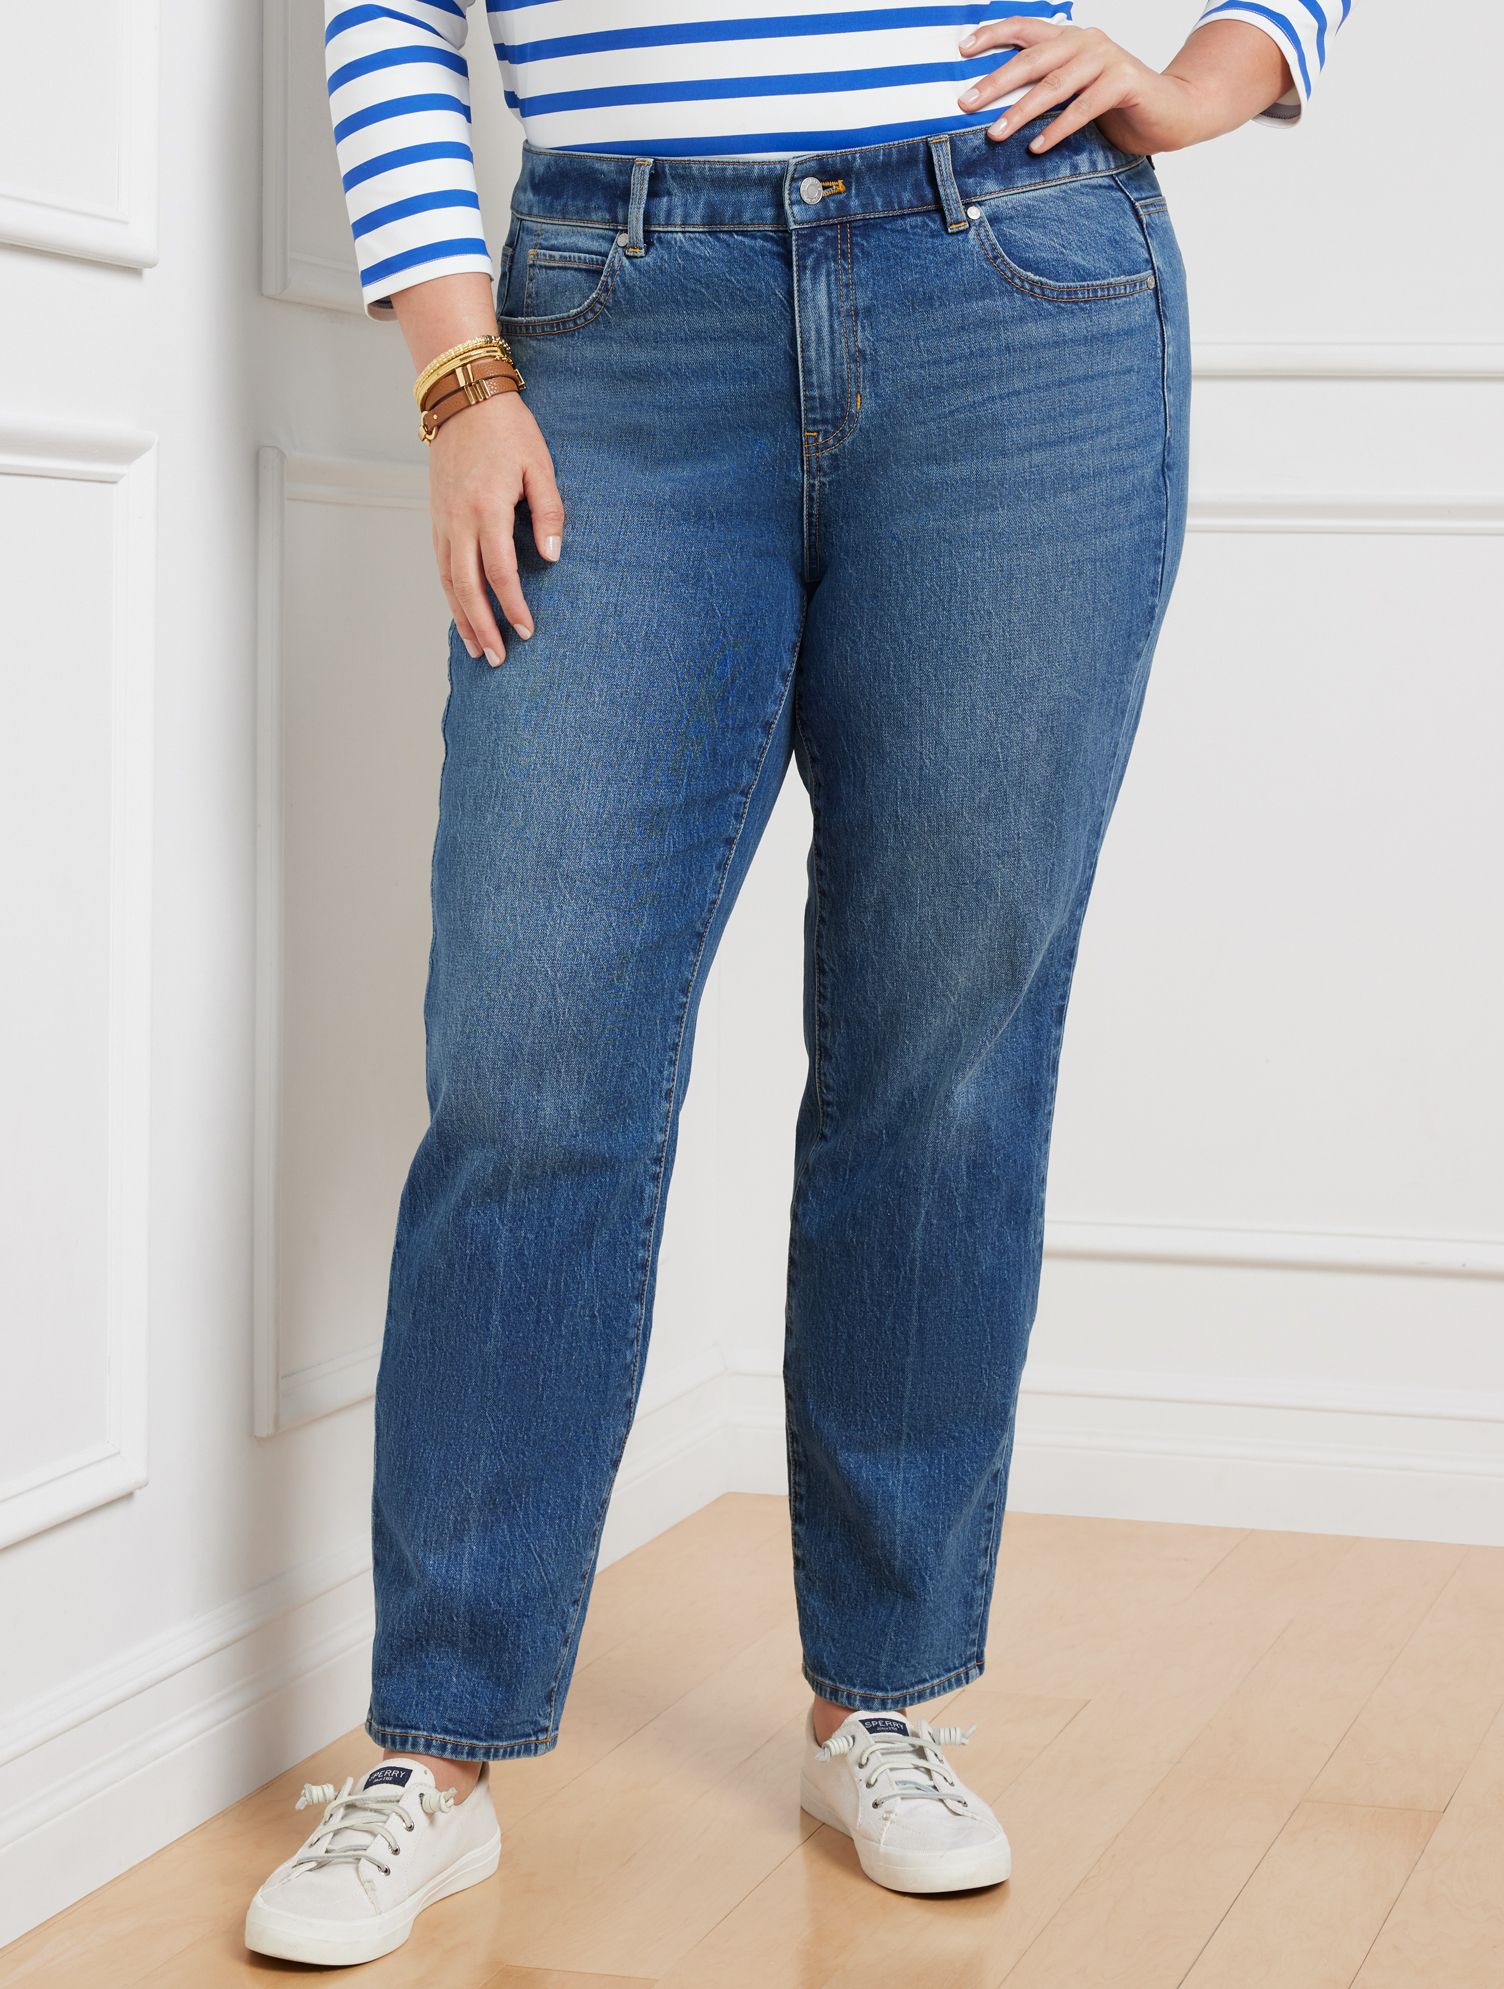 Talbots High Waist Relaxed Jeans - Palisade Wash - 20